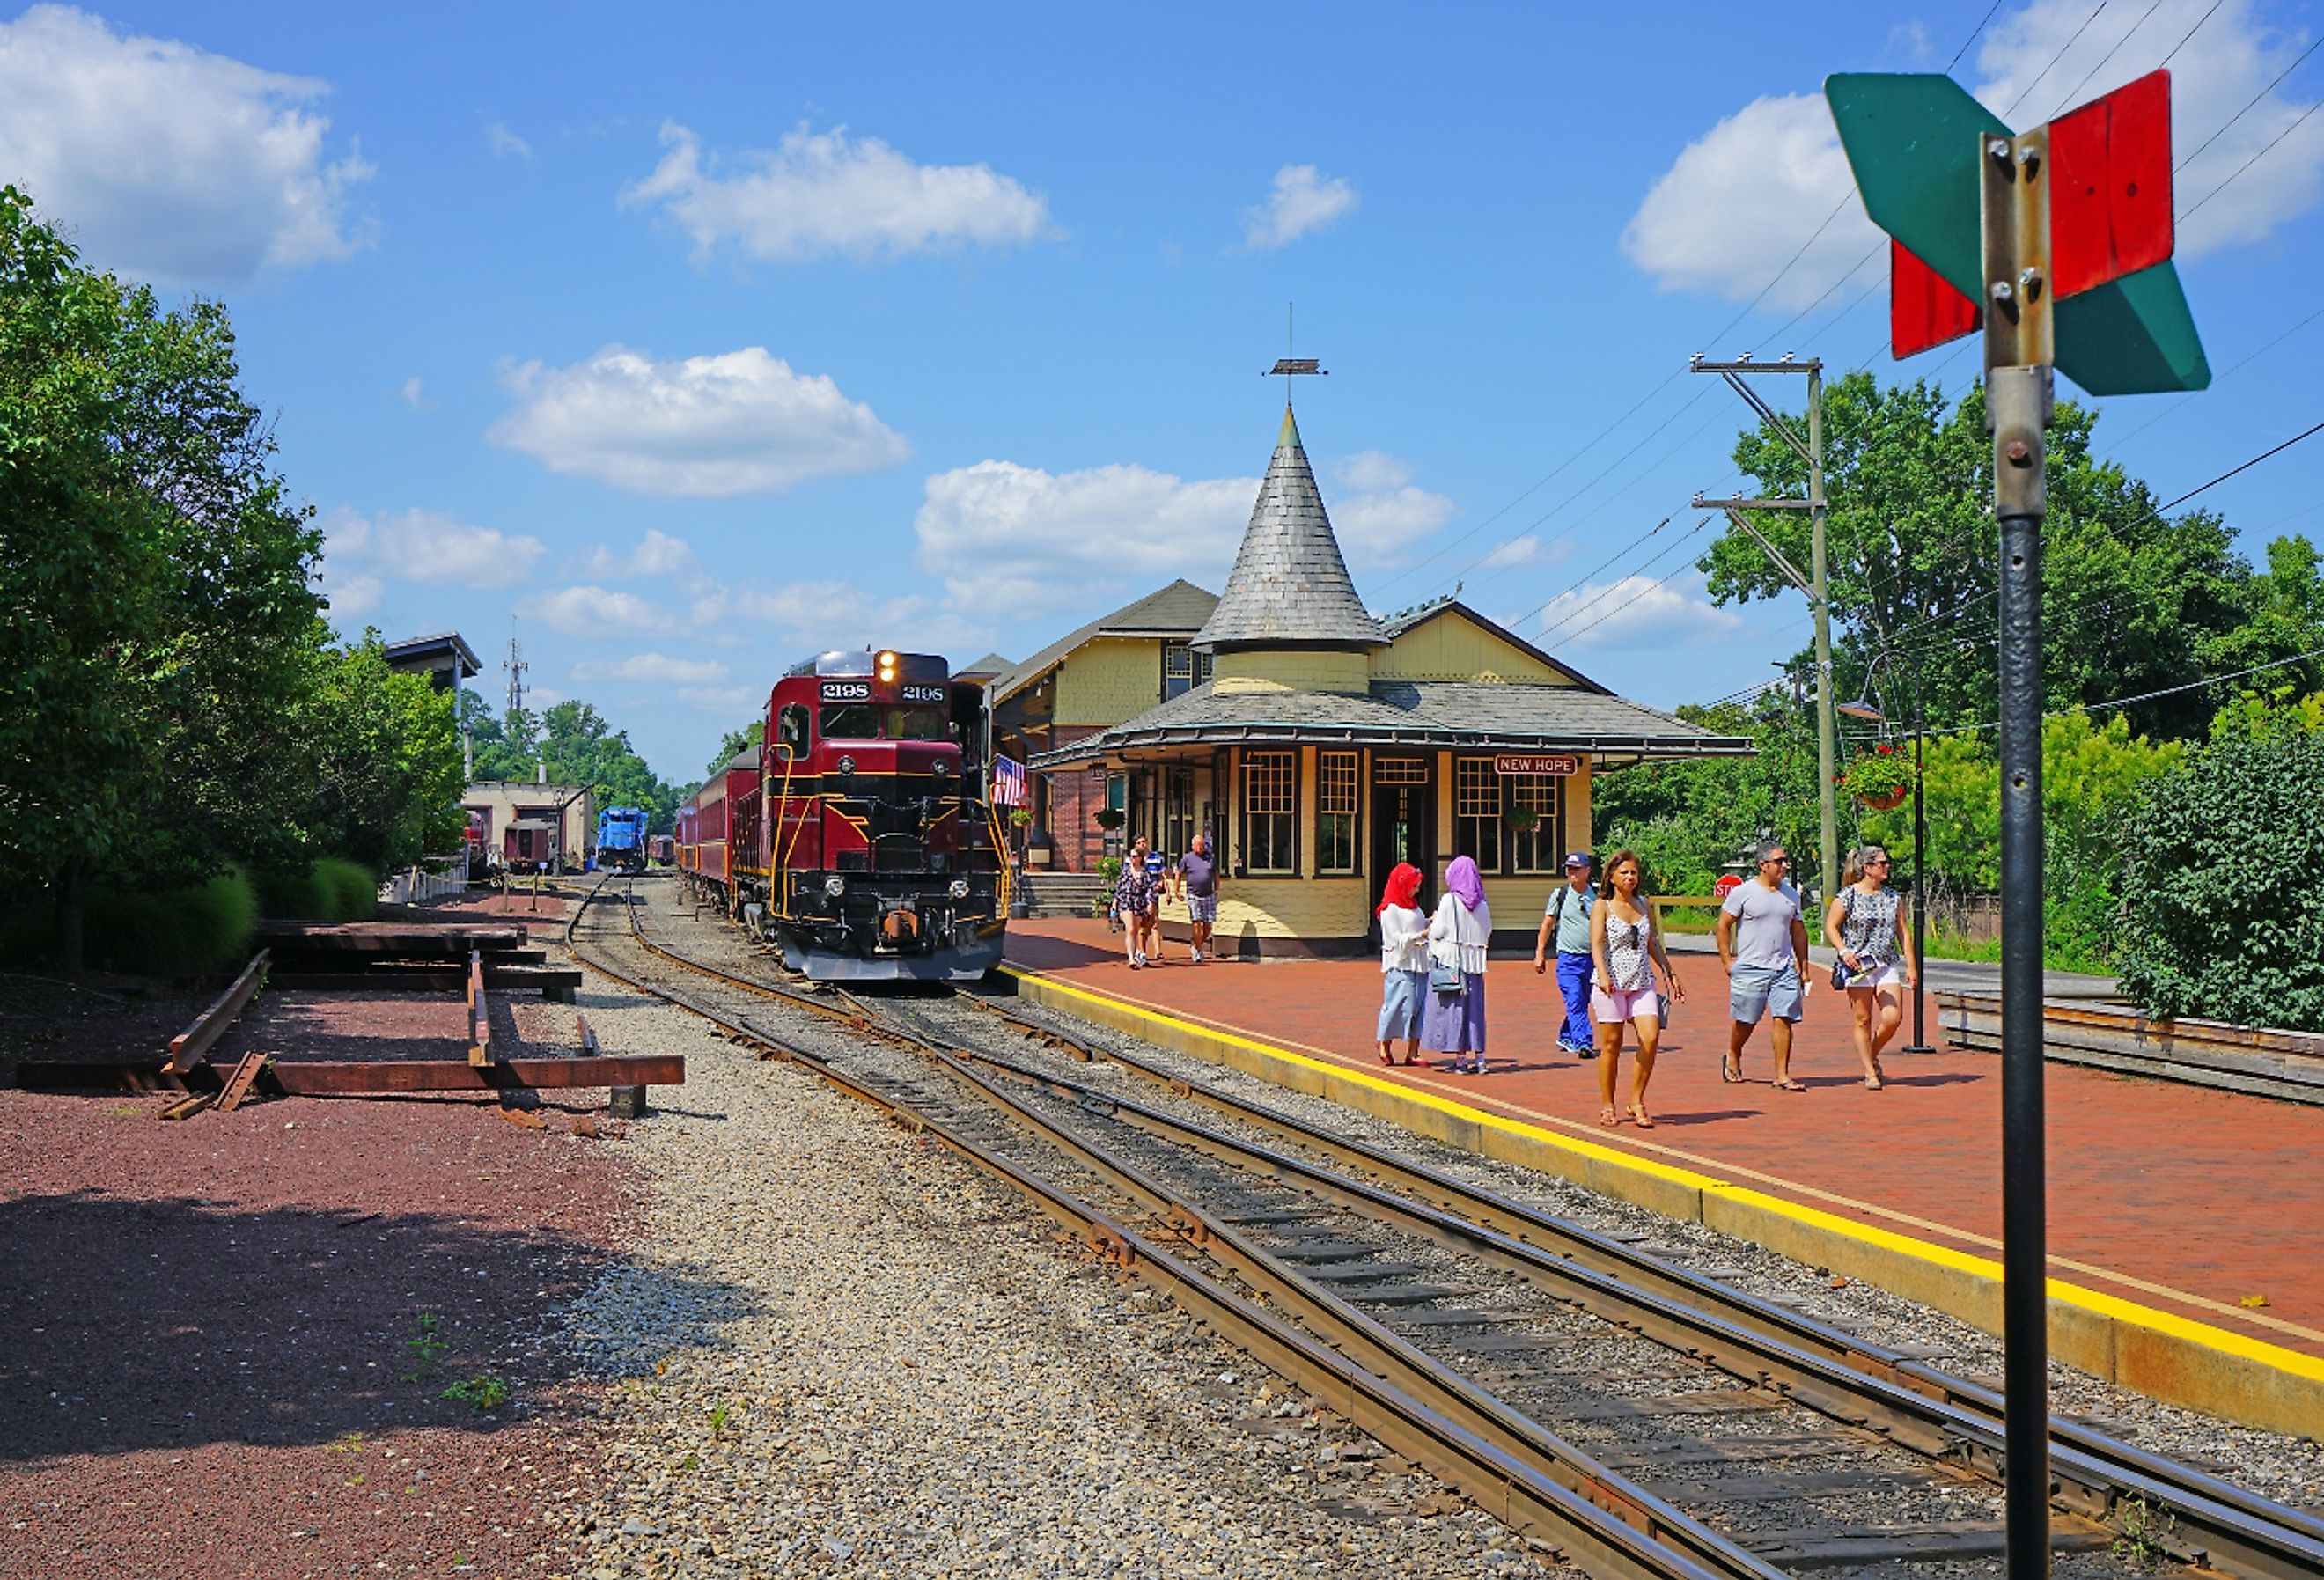 New Hope and Ivyland rail road, a heritage train line in New Hope, Pennsylvania.